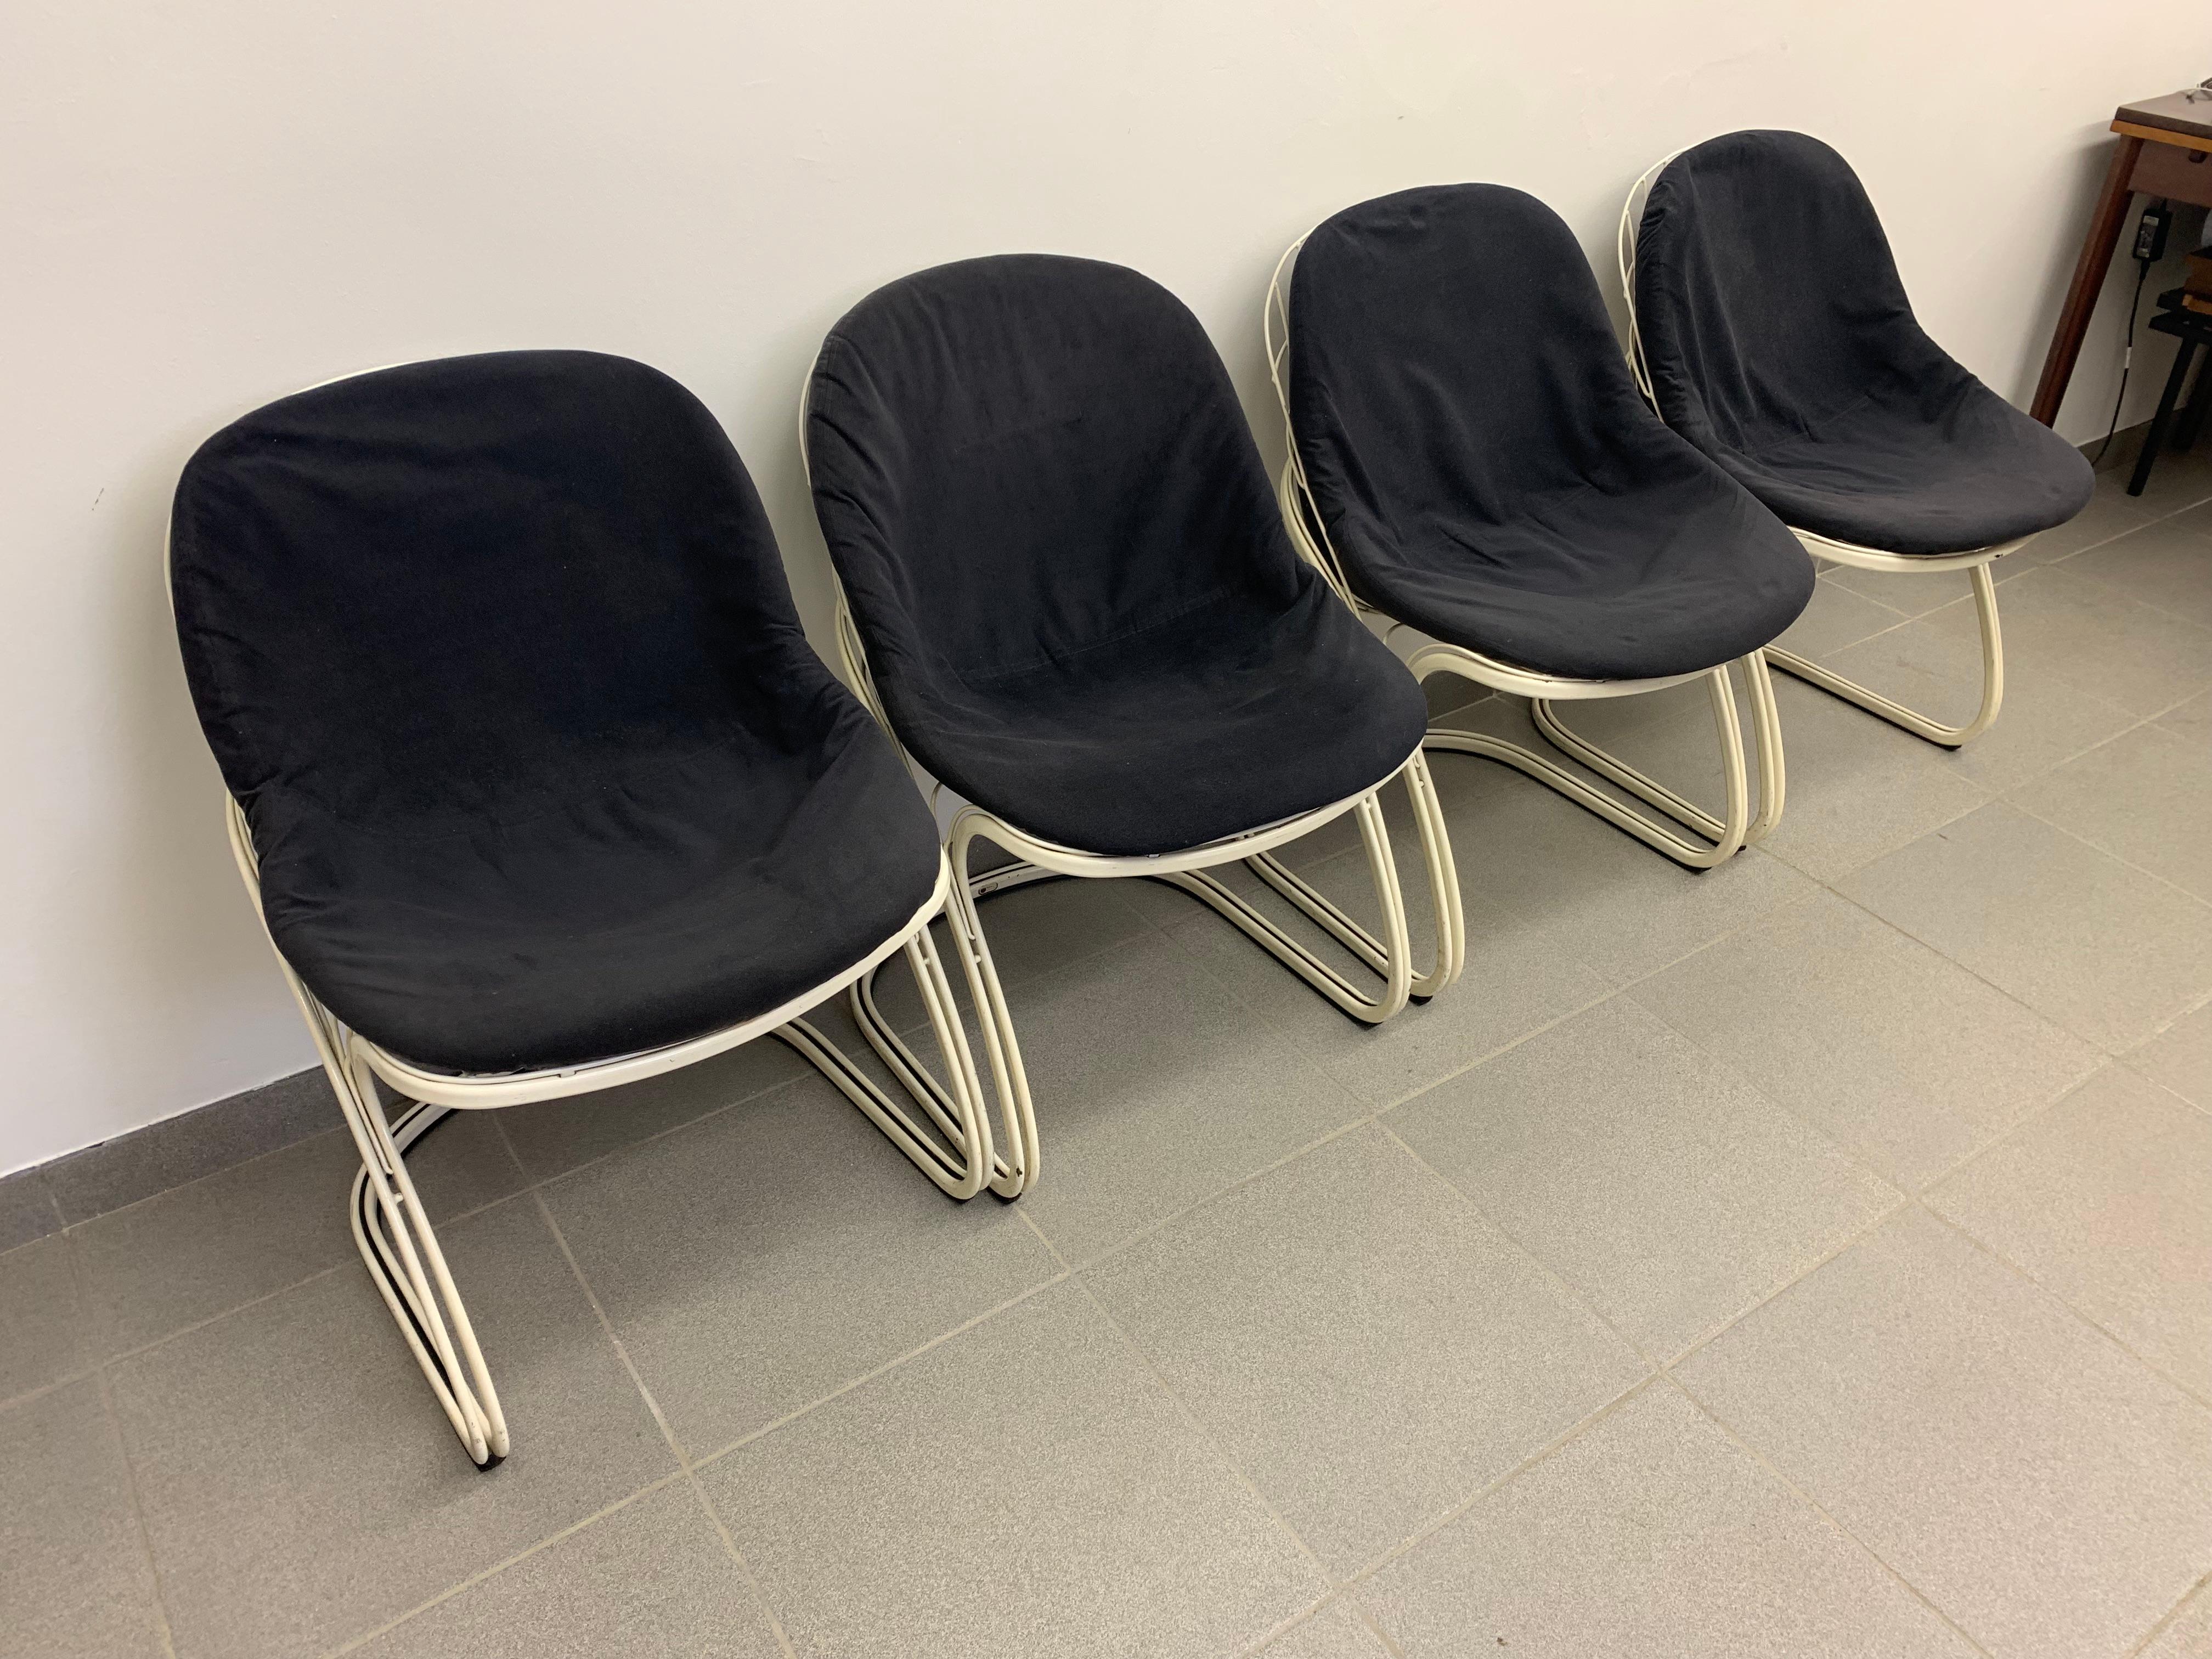 Sabrina chairs by Gastone Rinaldi for Thema, 1970s In Good Condition For Sale In Delft, NL